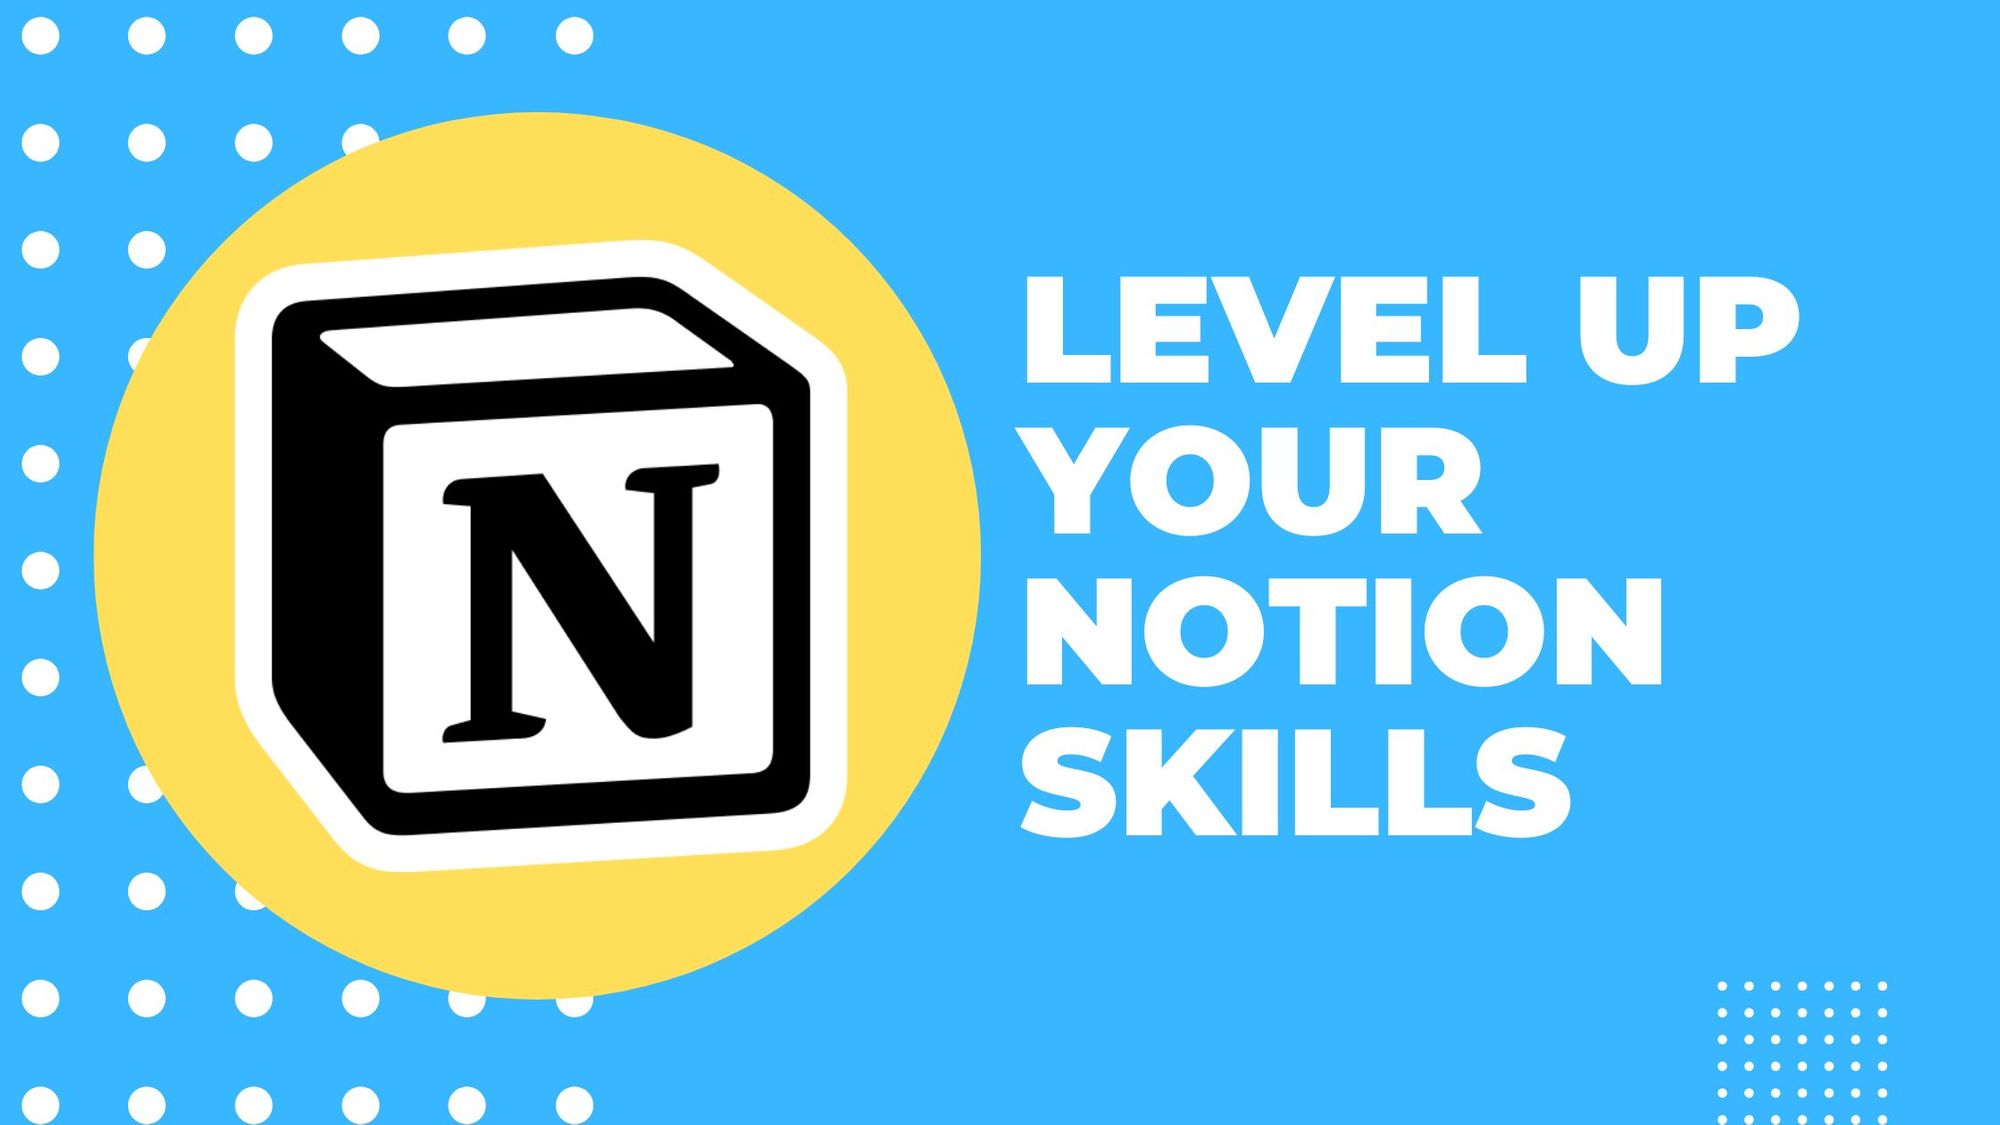 Level Up Your Notion Skills to Become the Company Hero